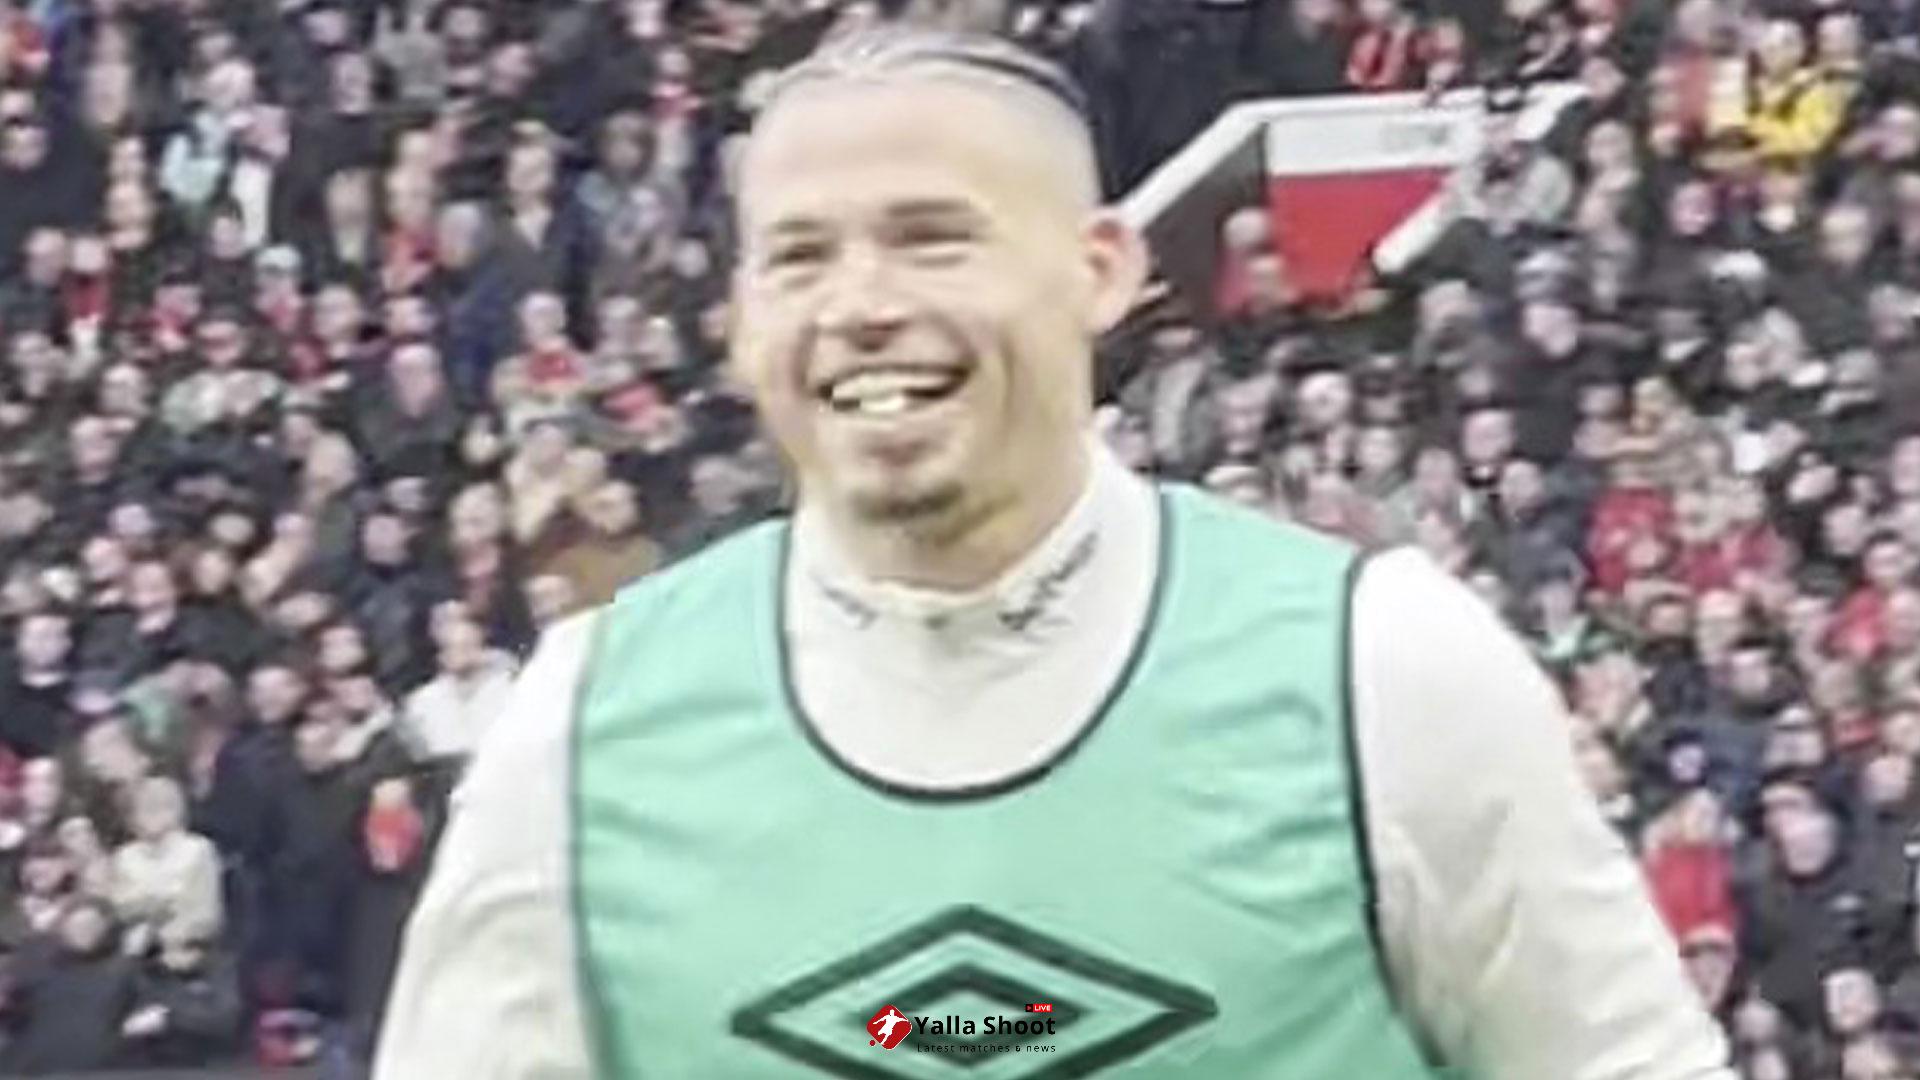 Man Utd fans brutally troll Kalvin Phillips with X-rated chant as he warms up - but City rival has perfect response